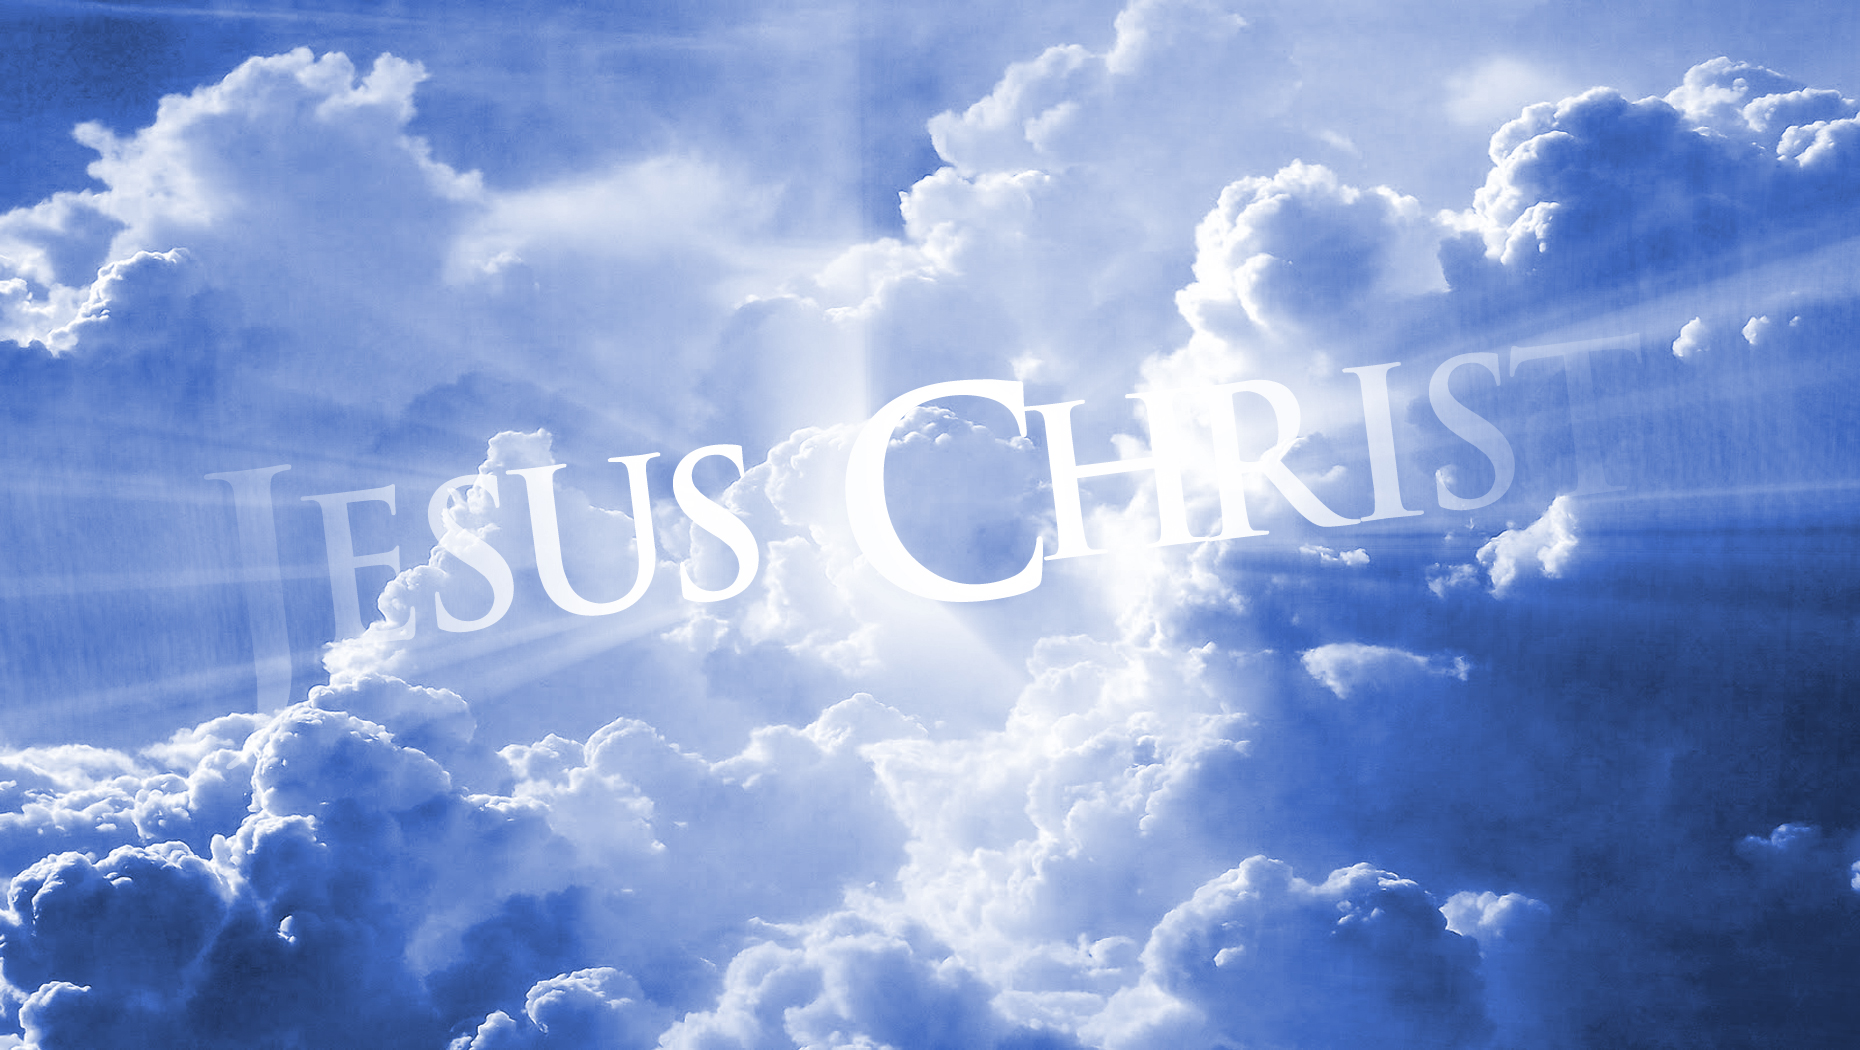 Jesus Christ God In Heaven as a picture for clipart free image download